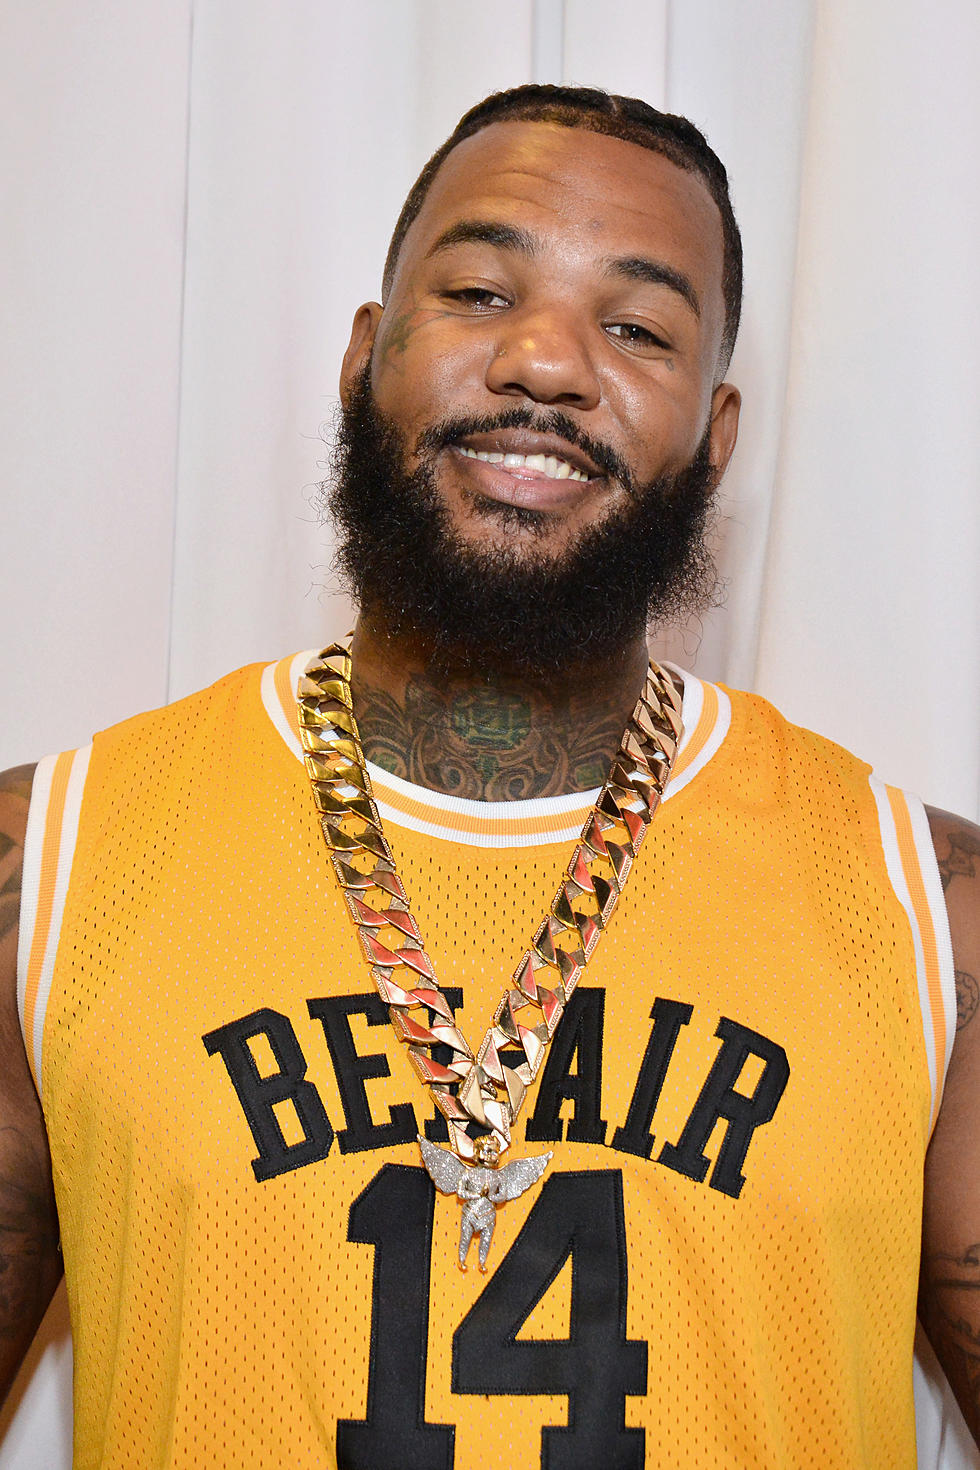 Judge Issues Arrest Warrant On The Game After Skipping Out on Court Date